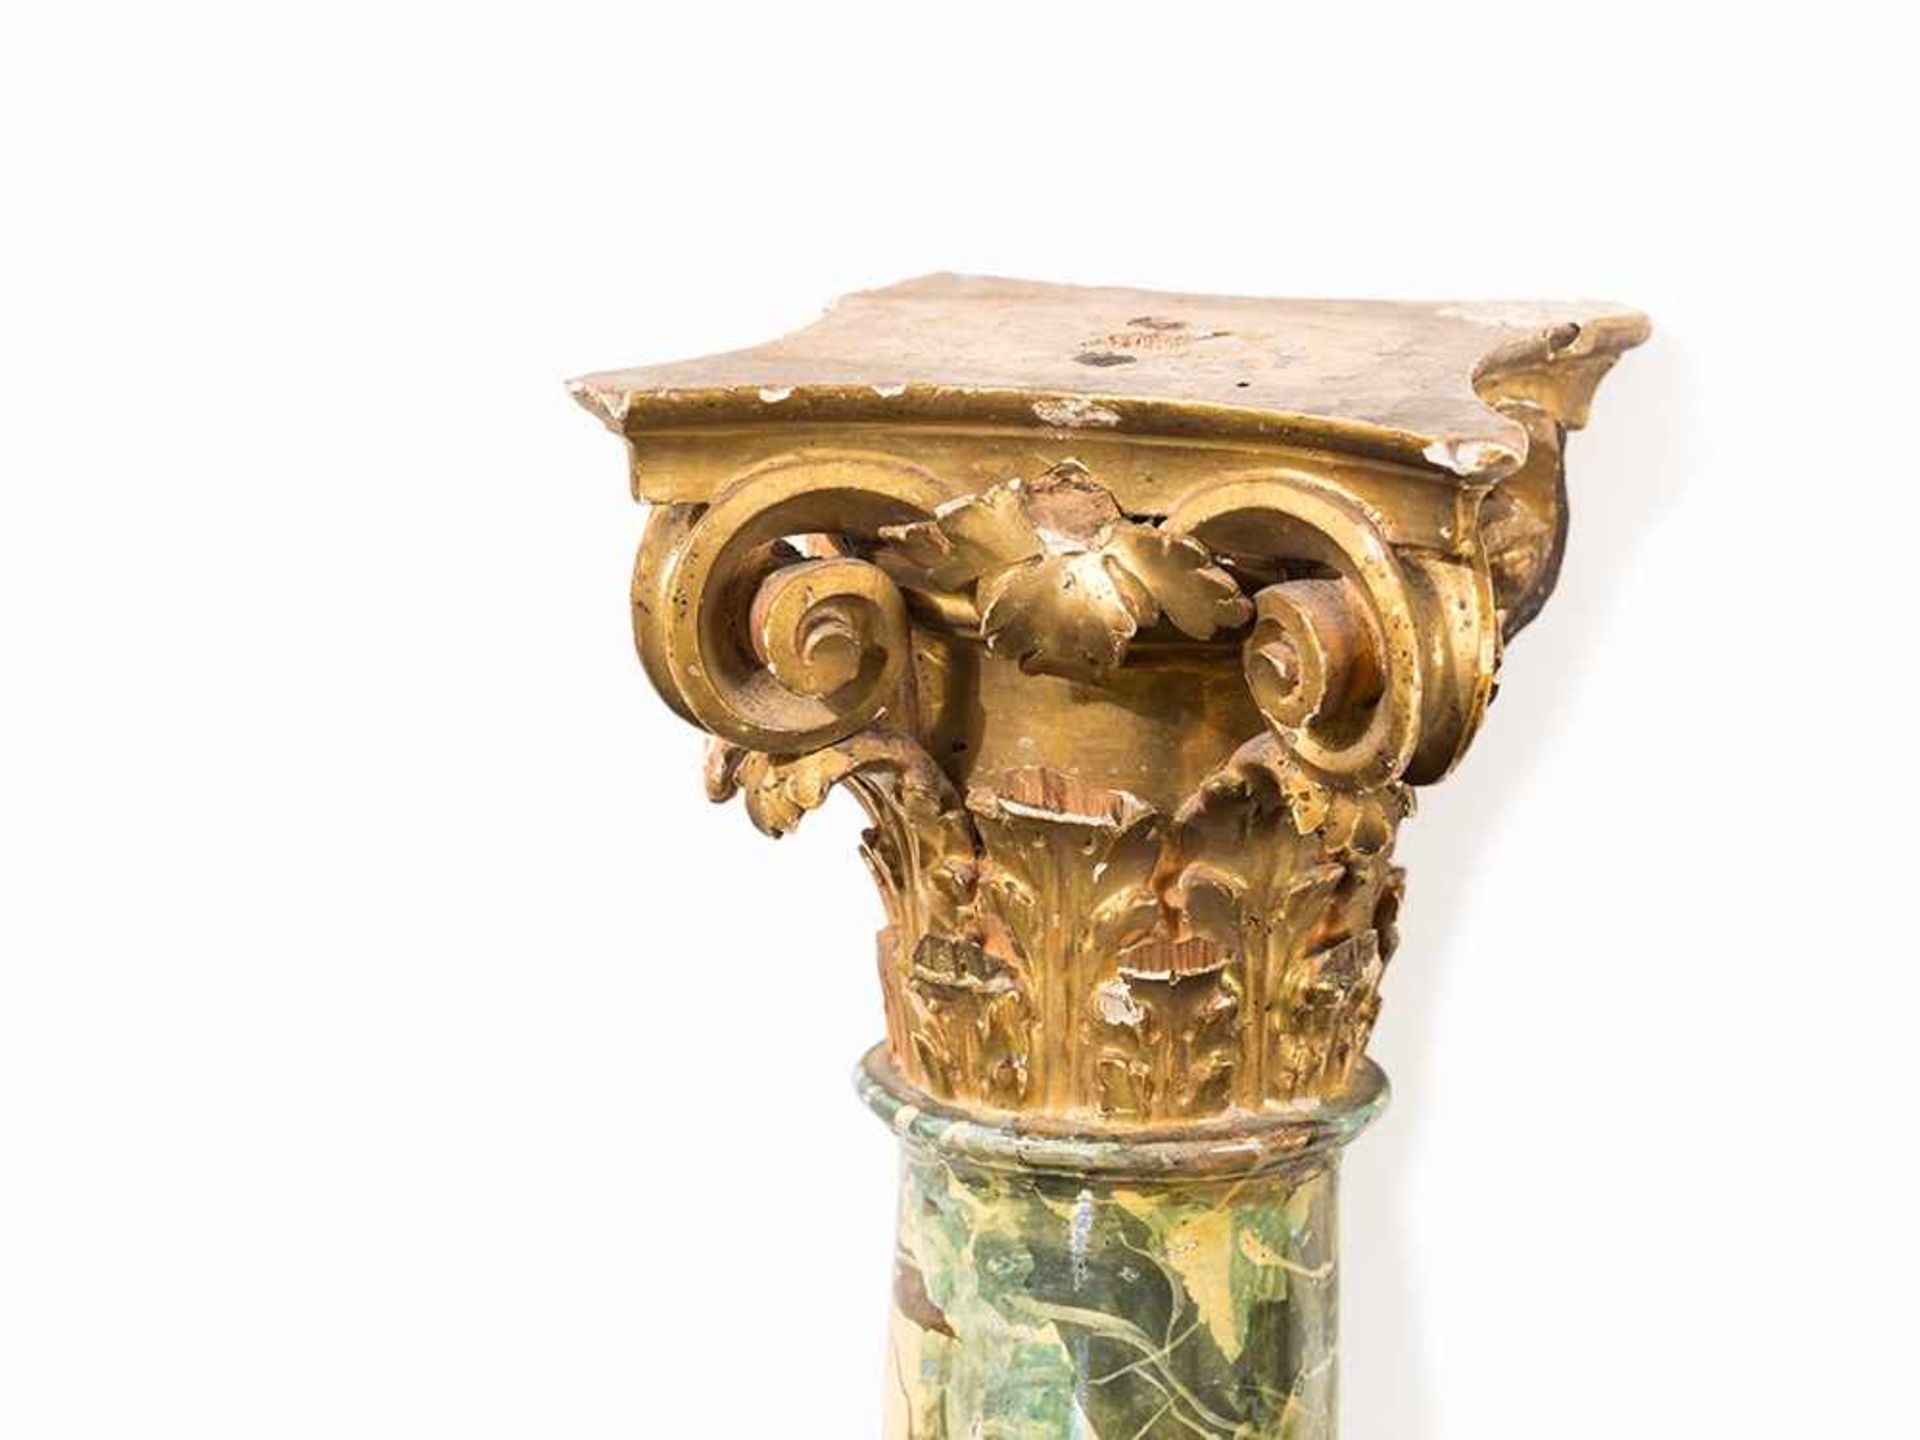 4 Corinthian Columns, Sicily, Late 18th C. Wood, carved and gold-plated, lacquered Sicily, late 18th - Bild 6 aus 10